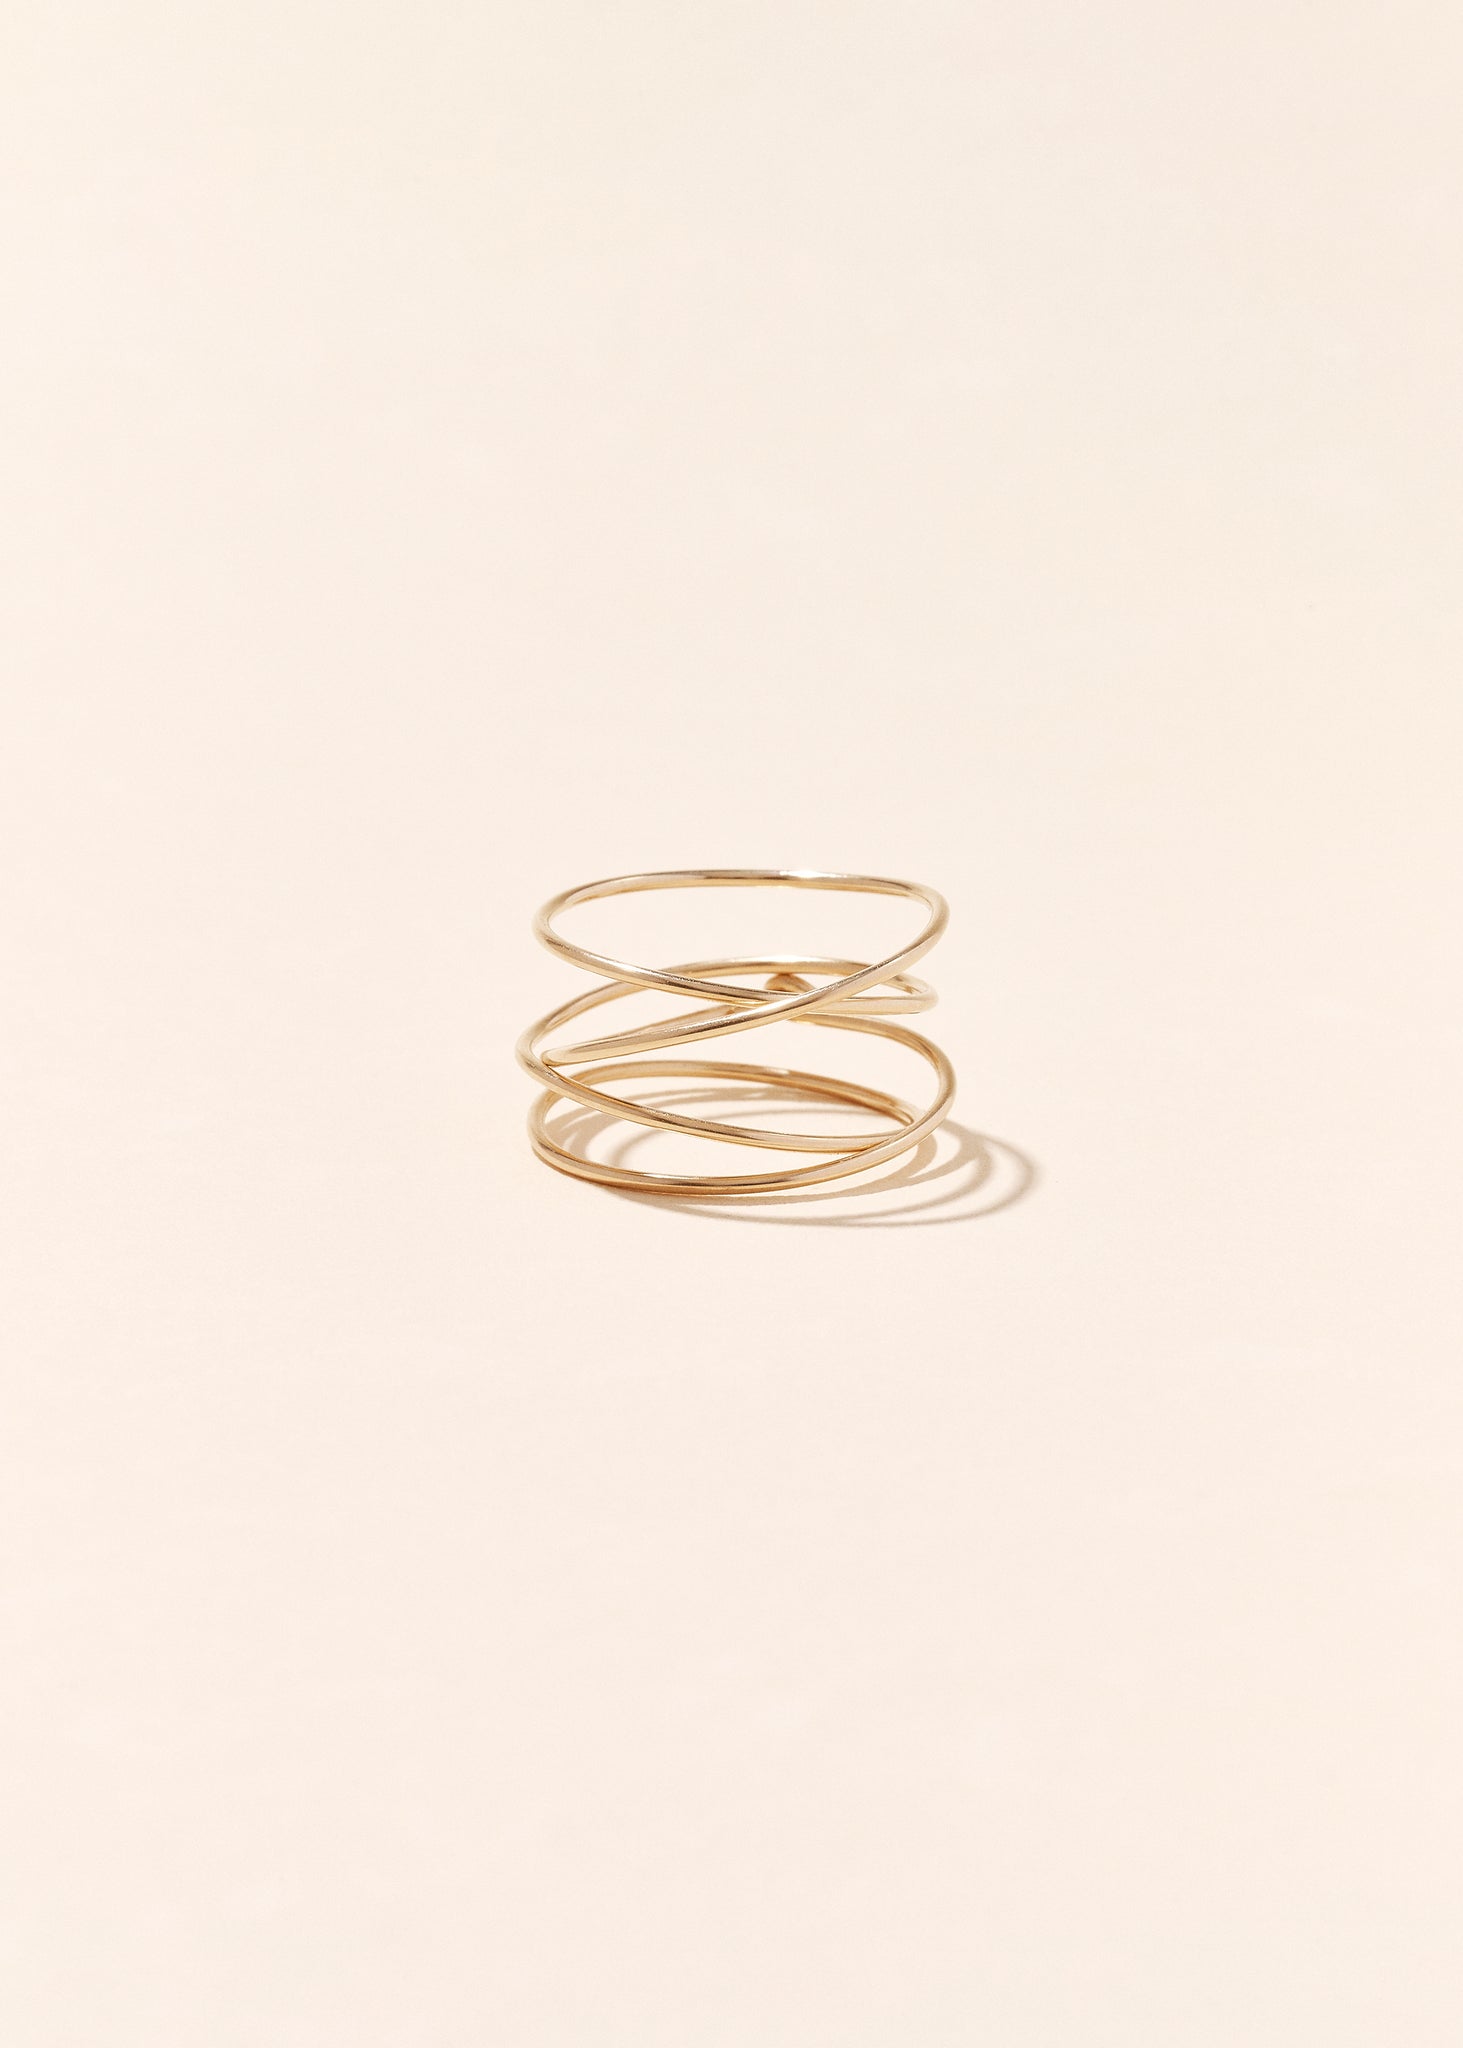 The Grosse Maille chain ring